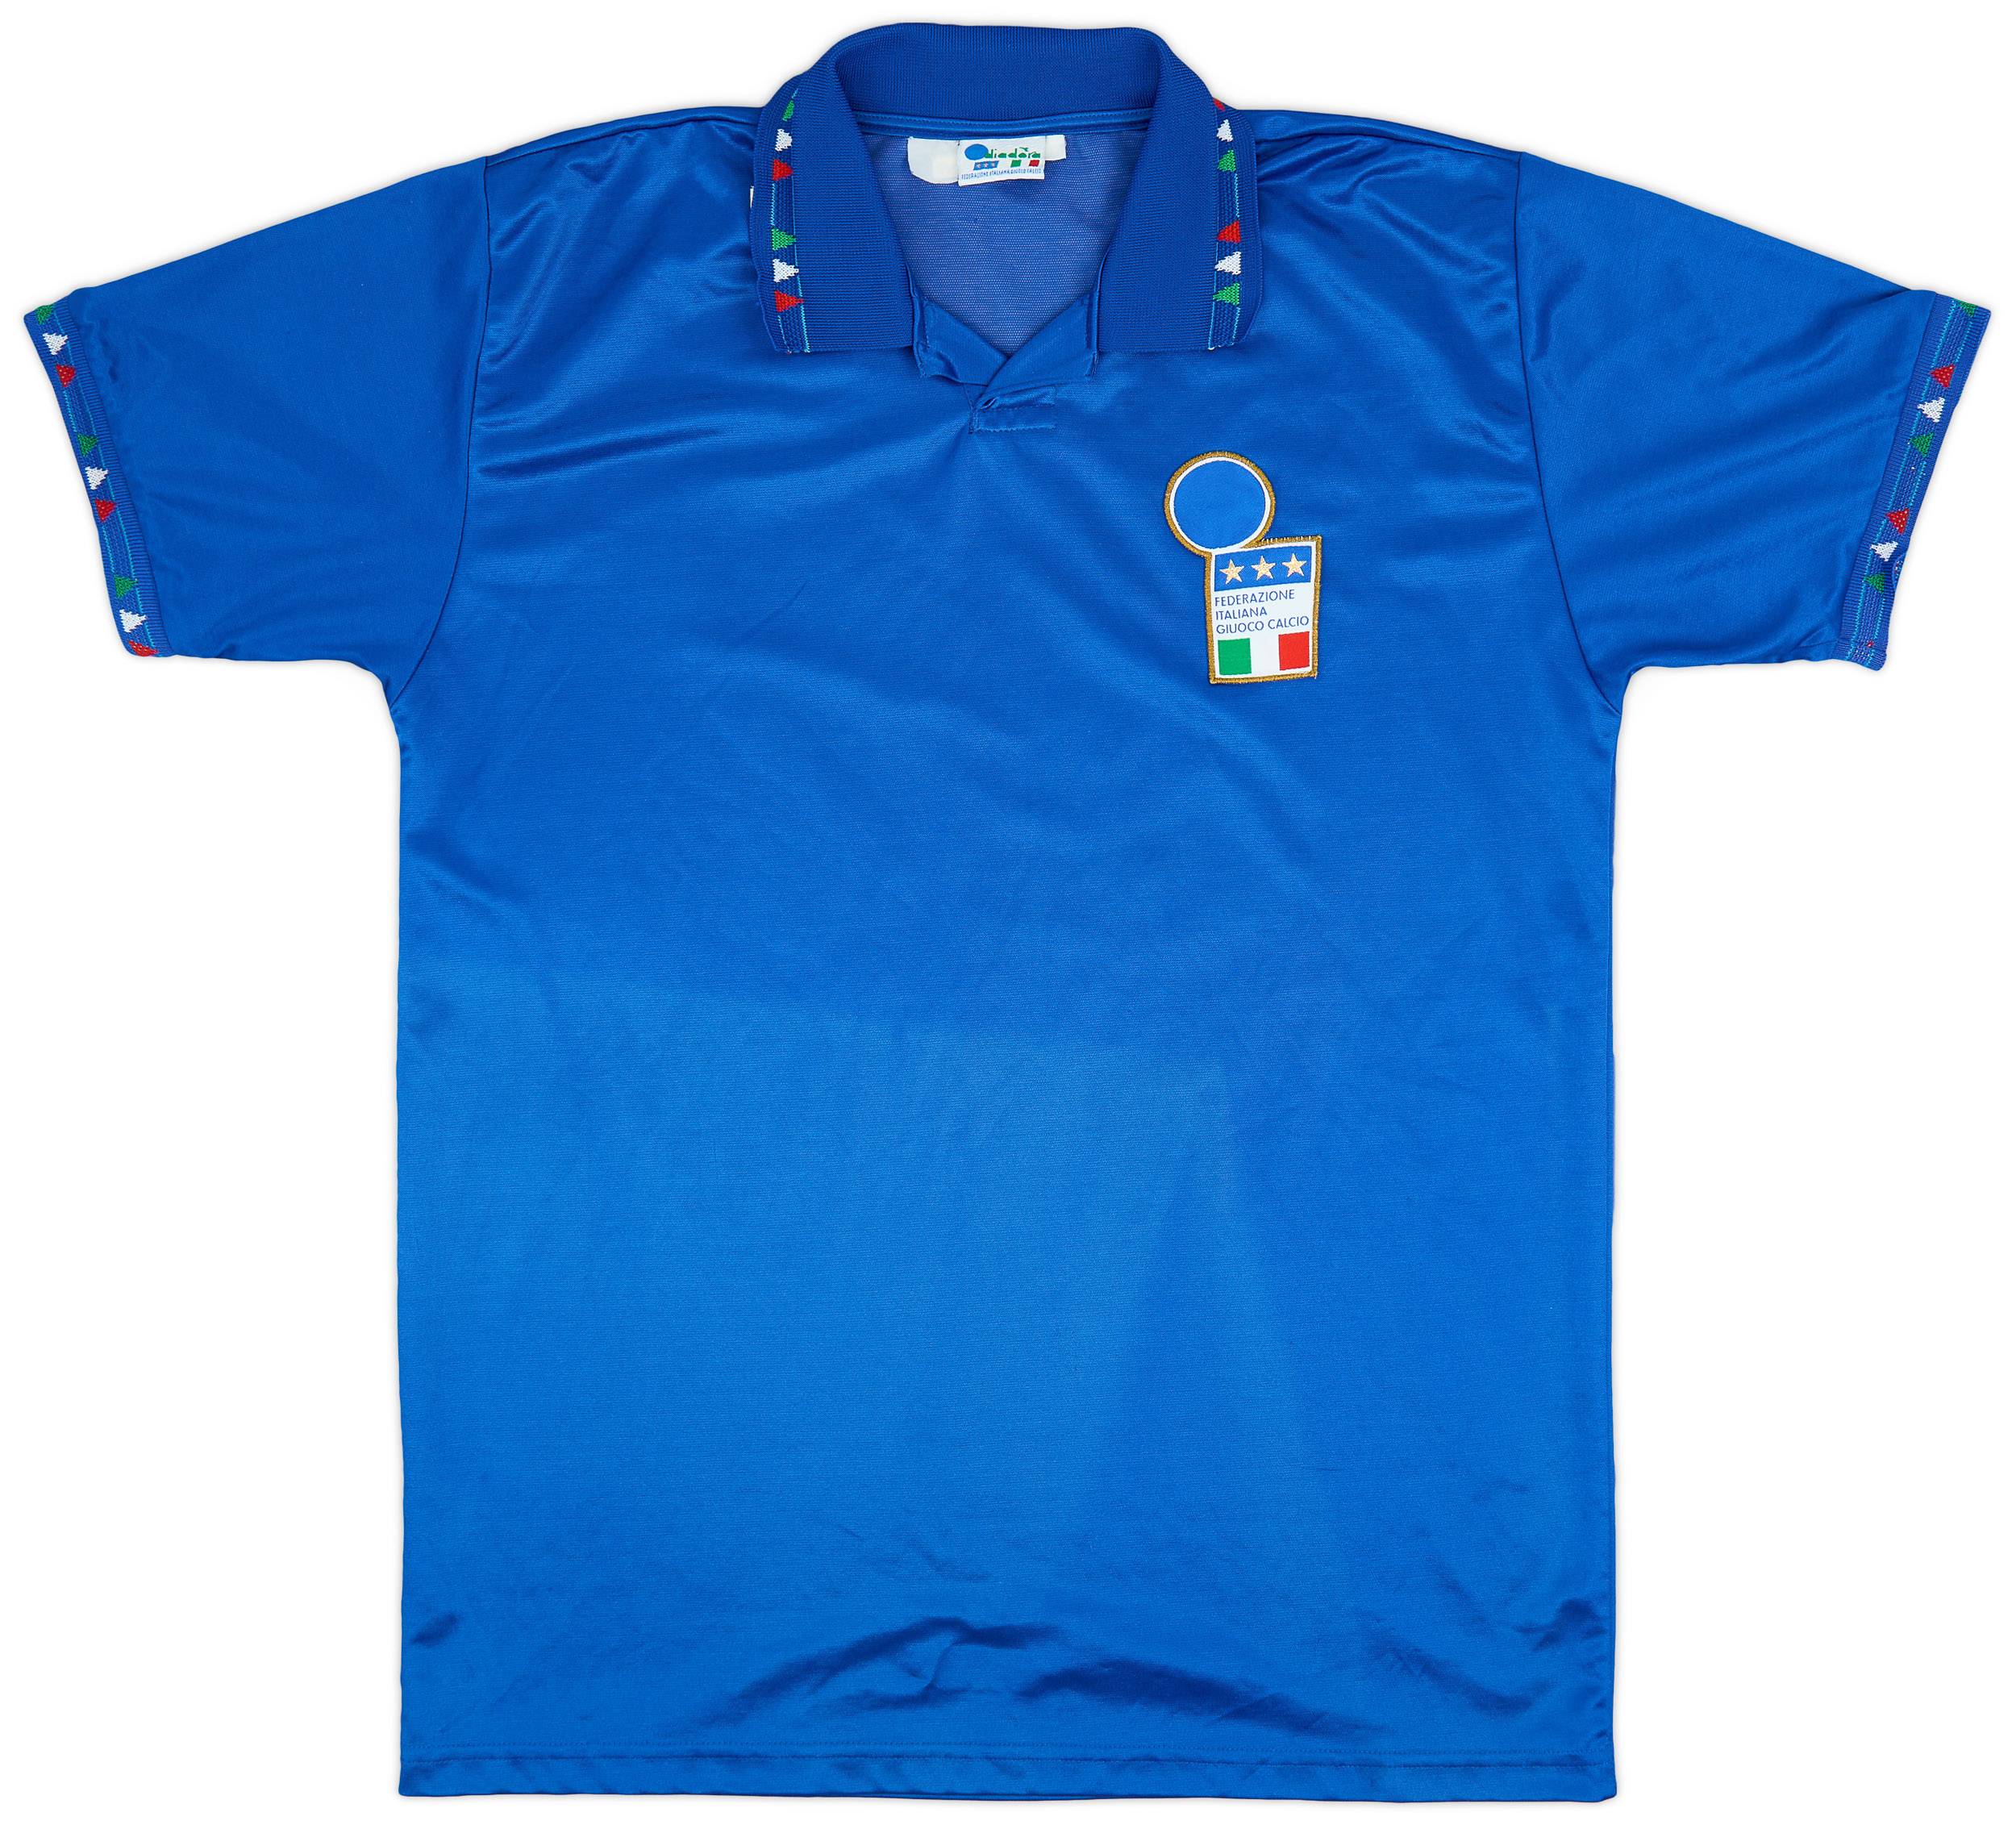 1992-93 Italy Home Shirt - 9/10 - (L)